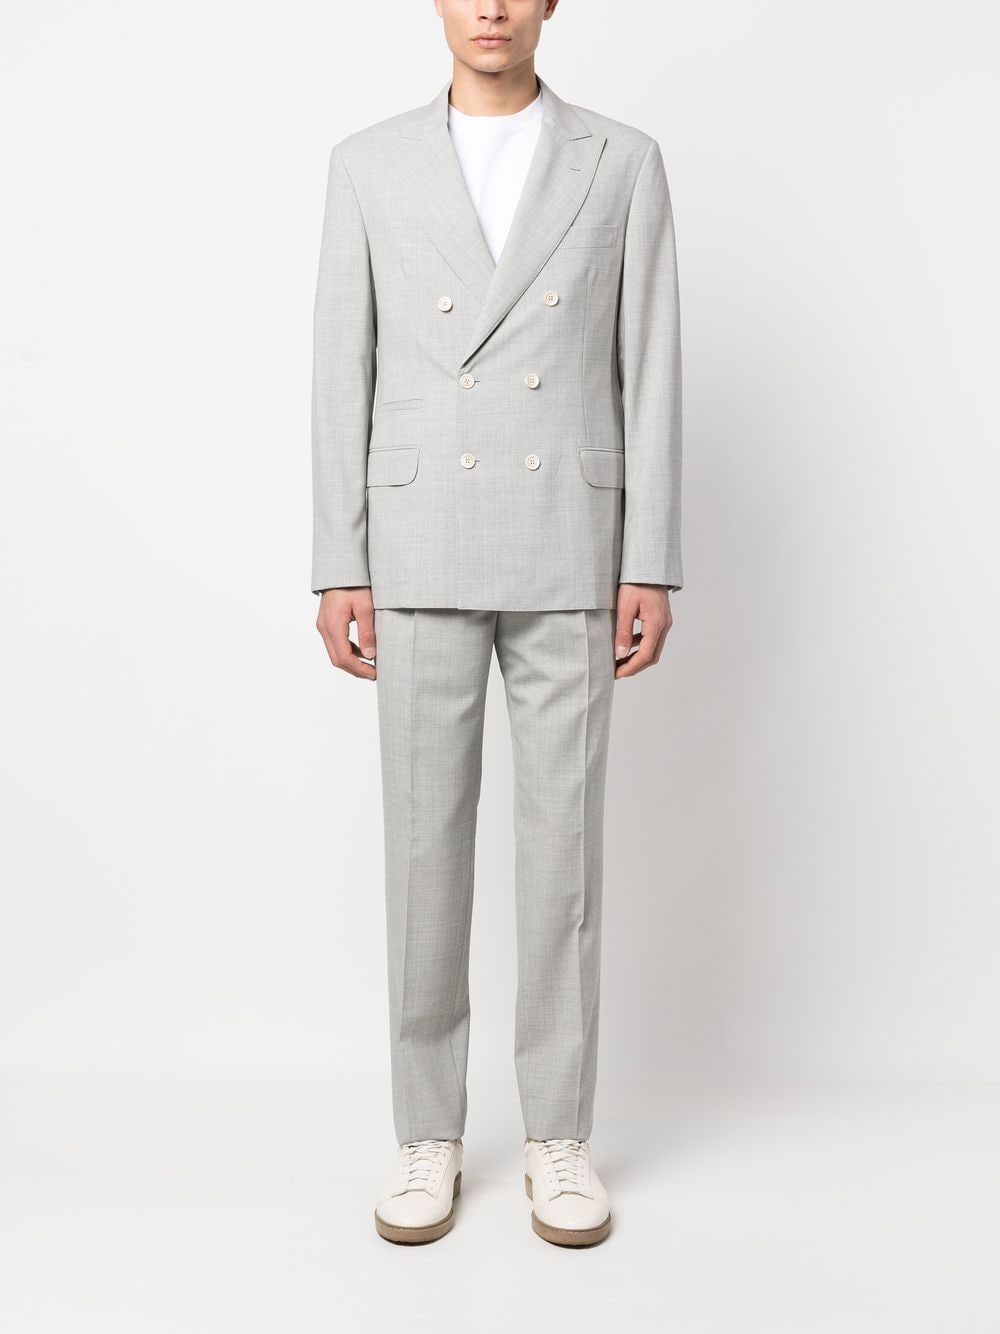 Pearl gray double-breasted suit